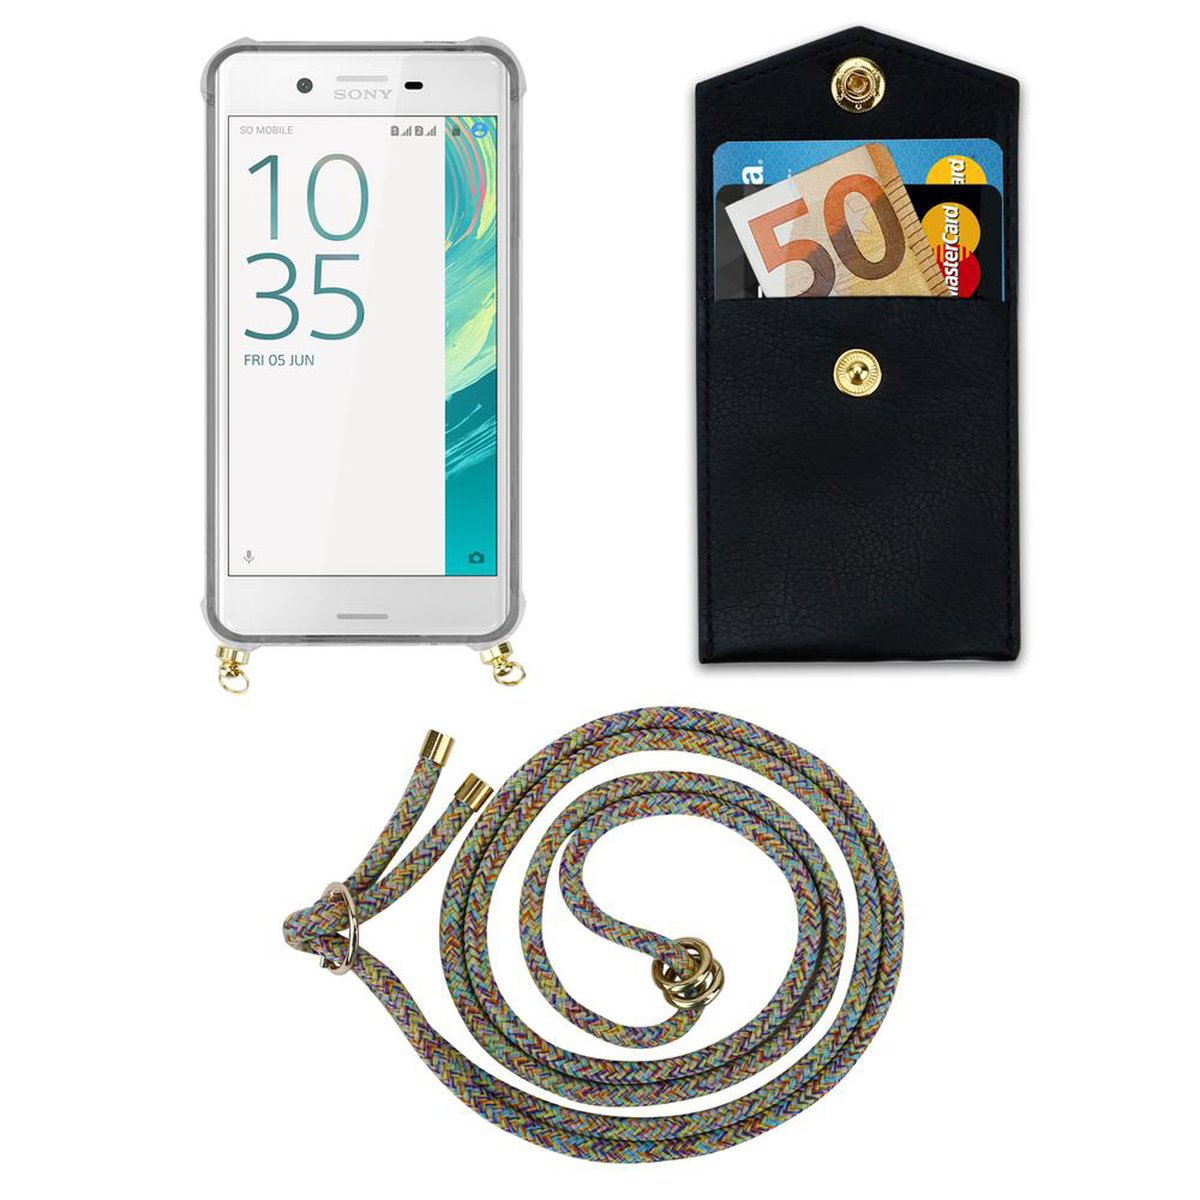 Gold Kette X, Kordel und mit RAINBOW Backcover, Xperia Ringen, abnehmbarer Hülle, Handy Sony, Band CADORABO